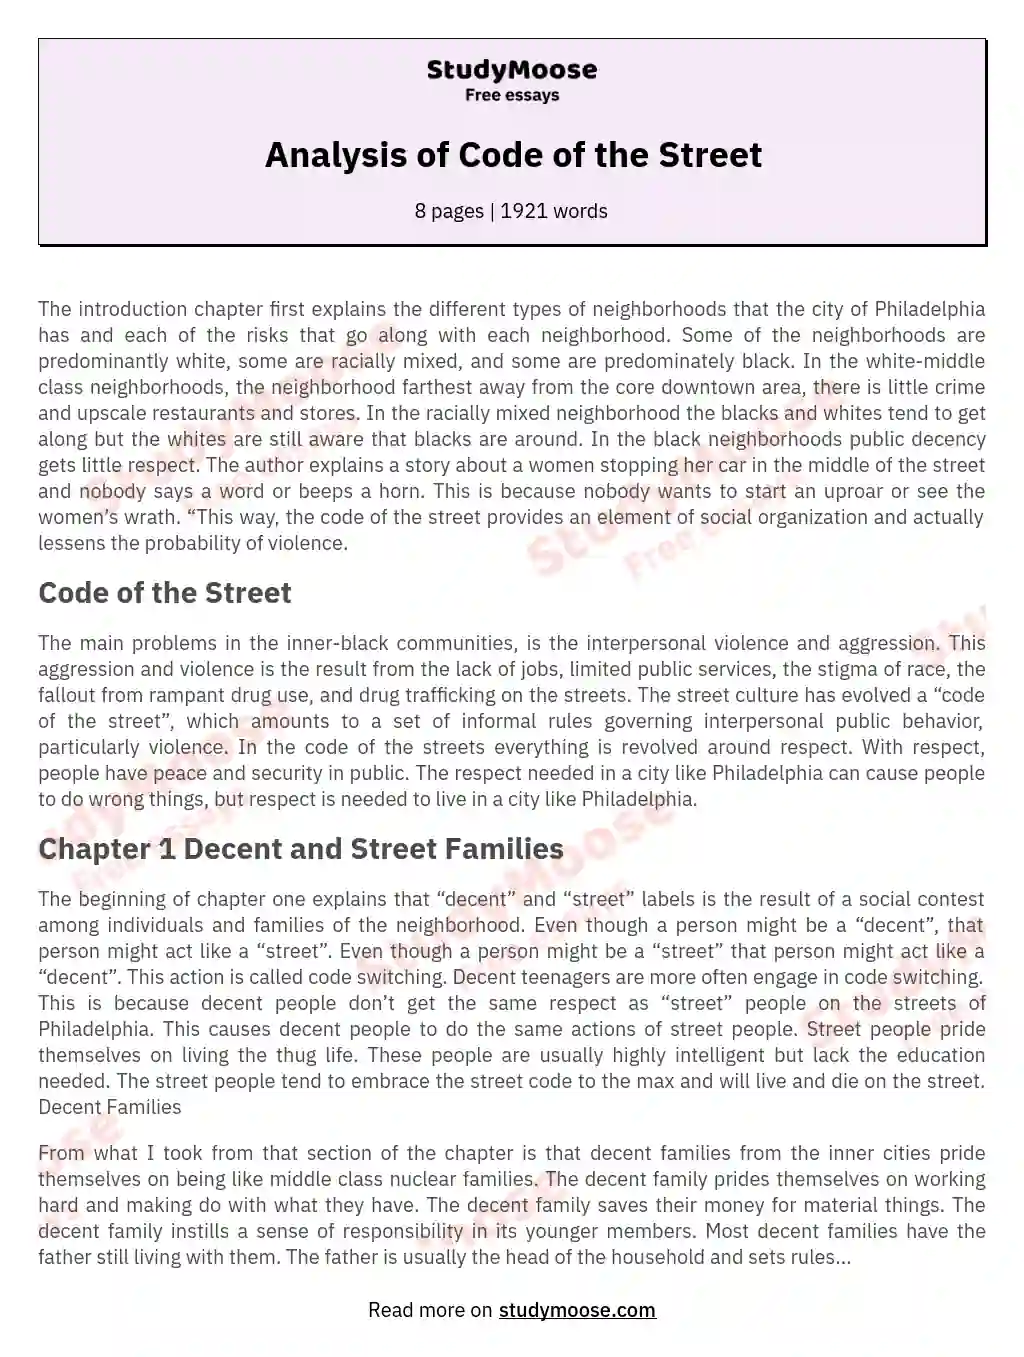 Analysis of Code of the Street essay